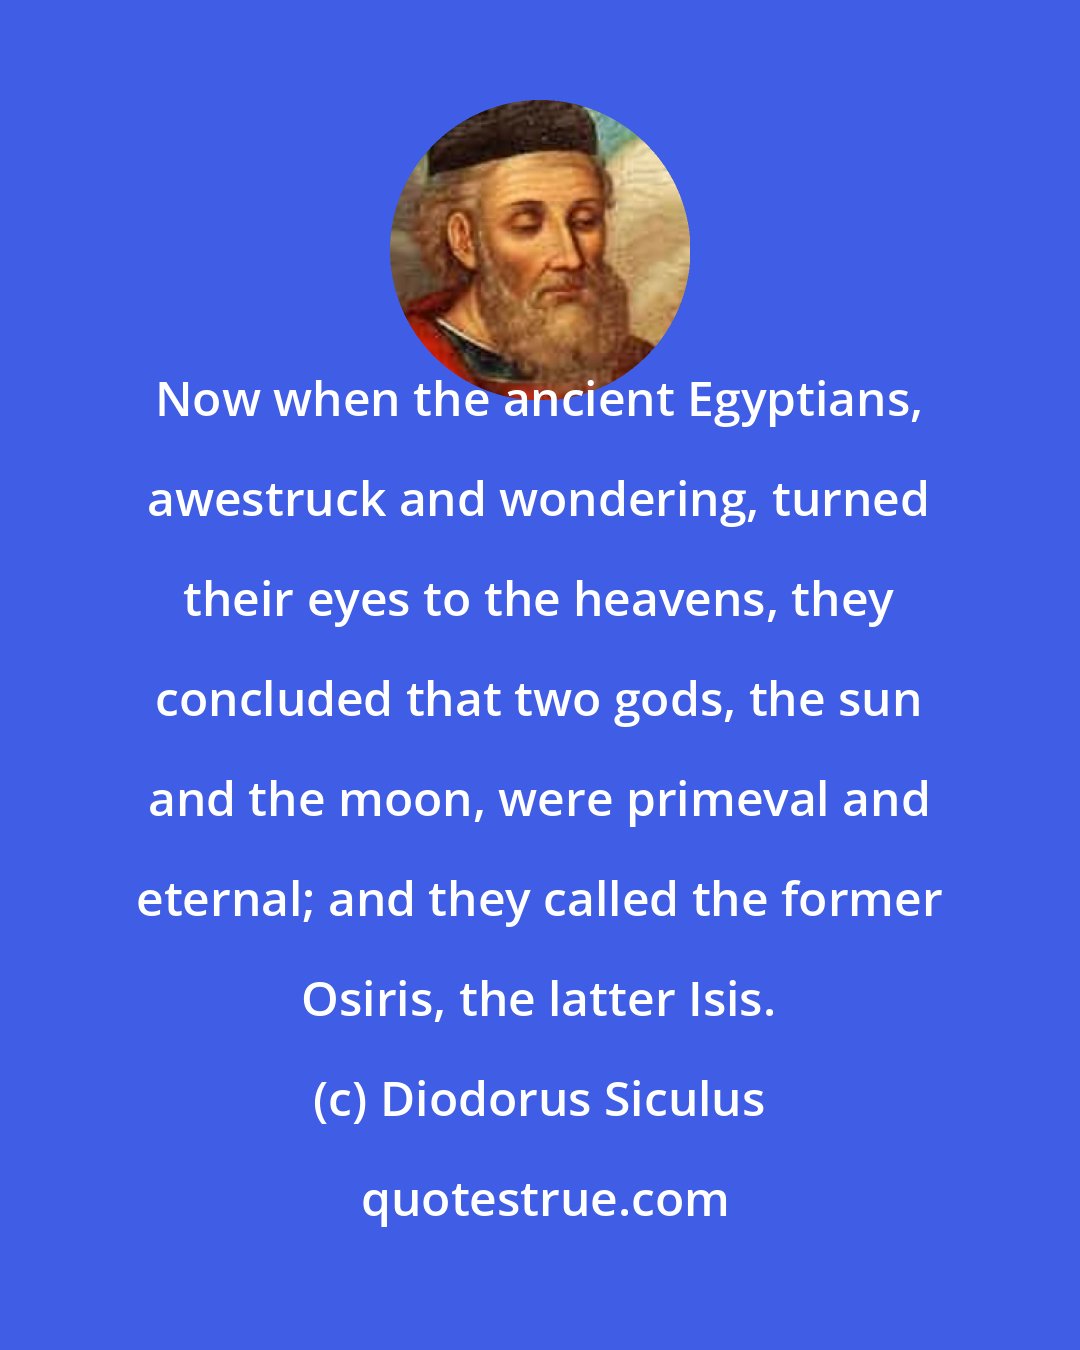 Diodorus Siculus: Now when the ancient Egyptians, awestruck and wondering, turned their eyes to the heavens, they concluded that two gods, the sun and the moon, were primeval and eternal; and they called the former Osiris, the latter Isis.